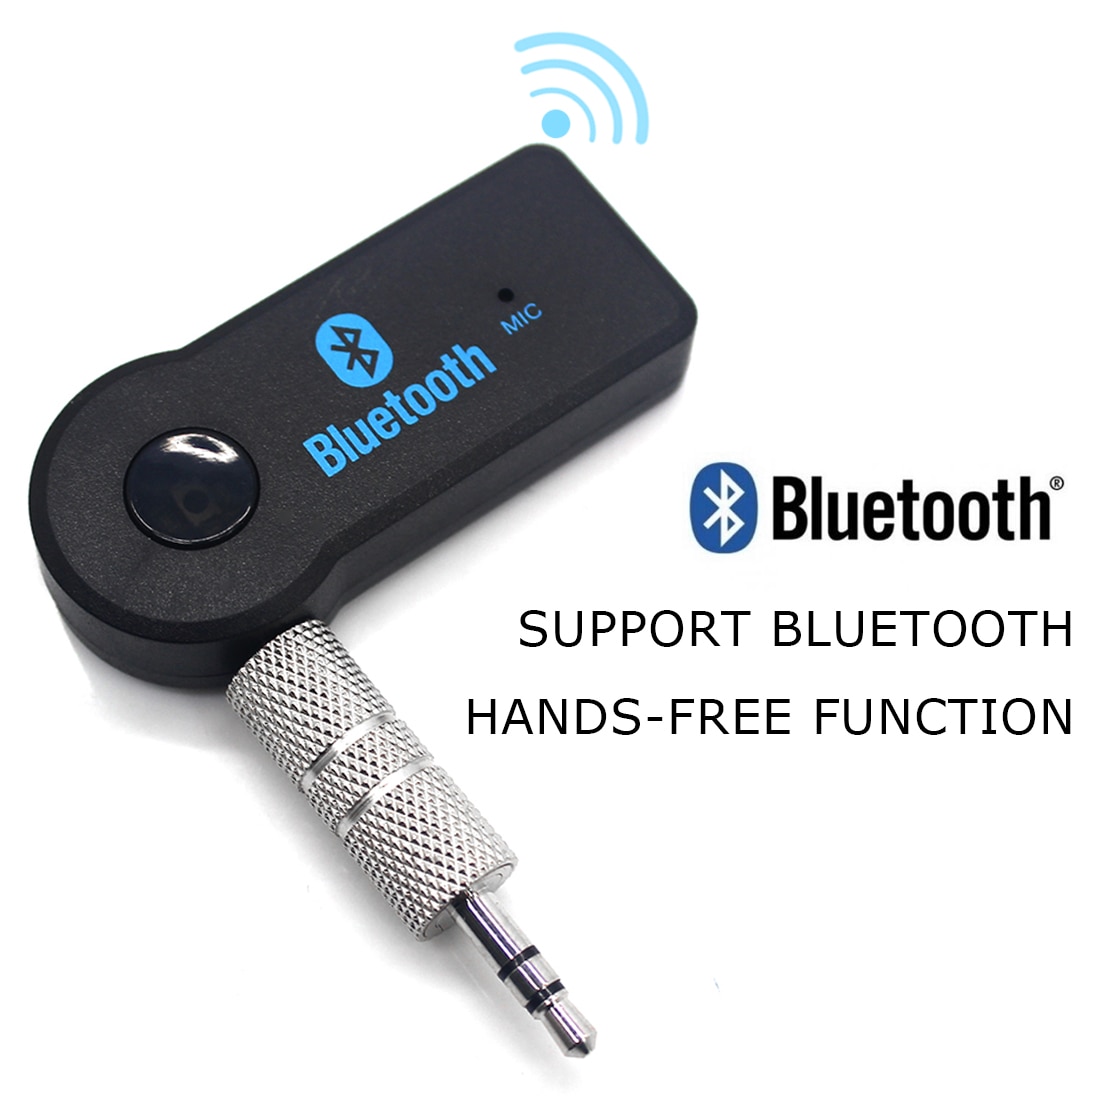 Bluetooth Adapter Usb Dongle Bluetooth 3.0 Music Receiver Voor Pc Computer Draadloze Bluthooth Mini Bluetooth Zender Adapter